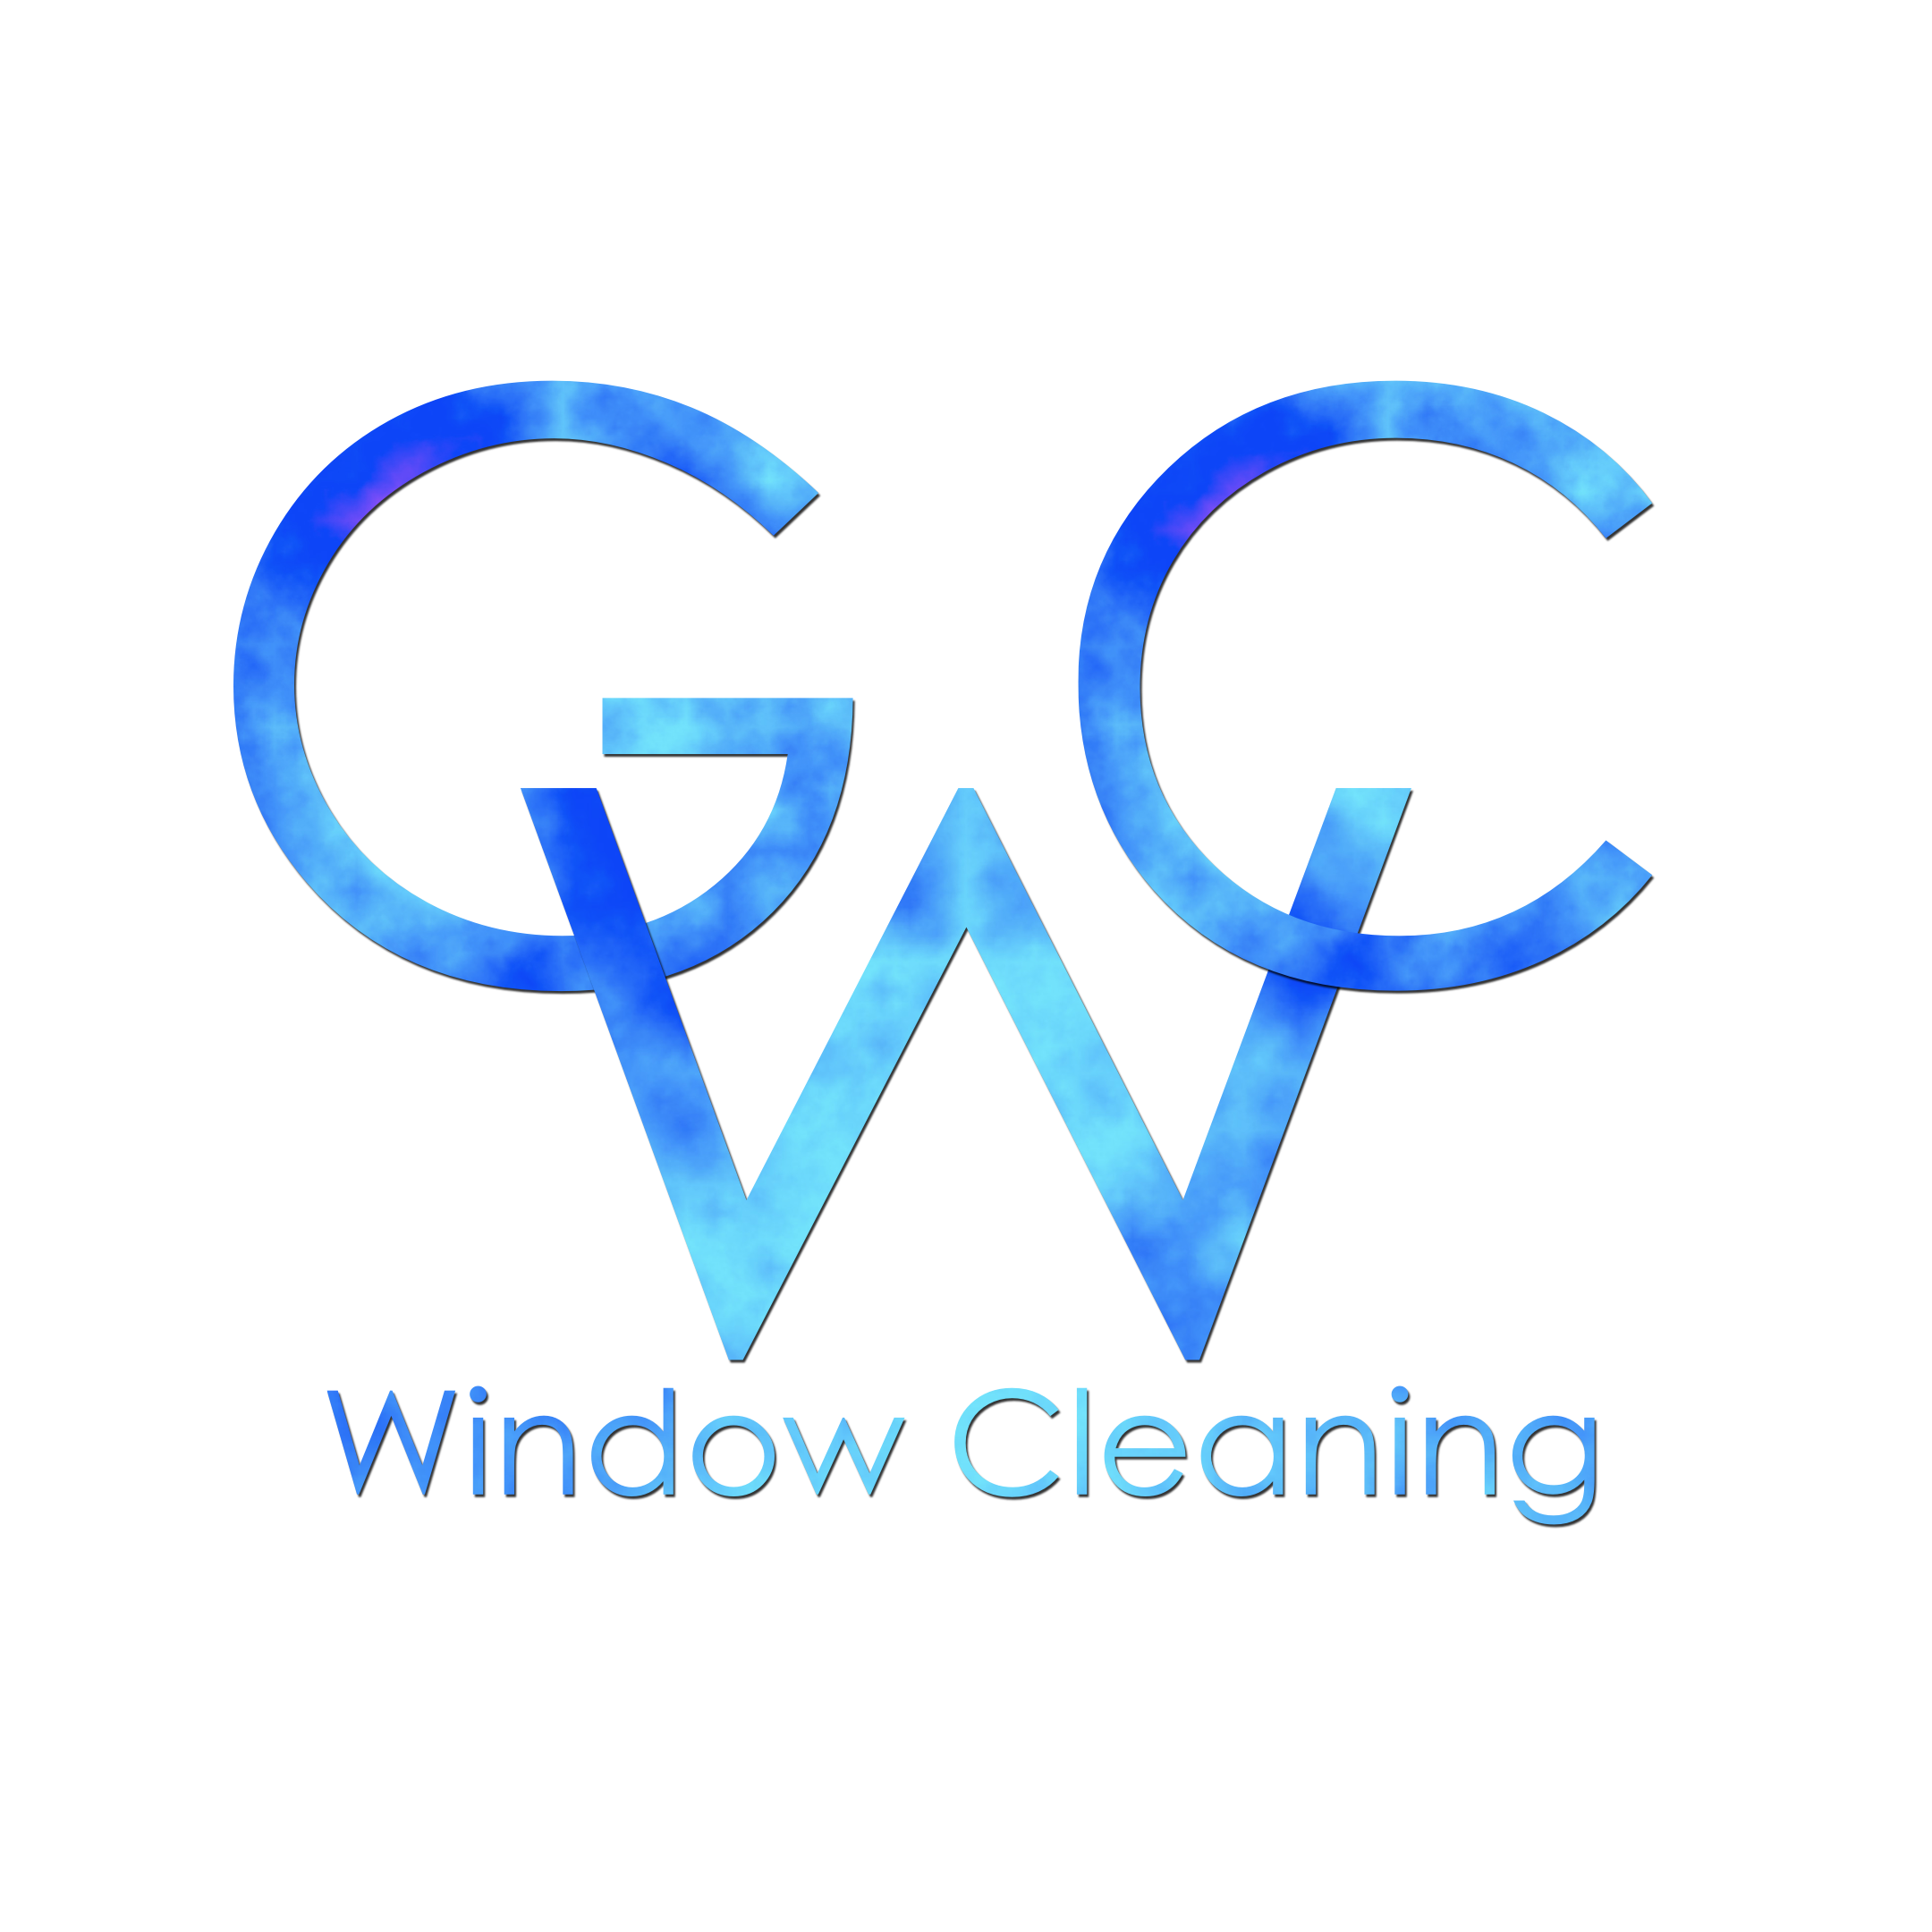 Glass With Class Inc. Your friendly neighborhood window cleaner!